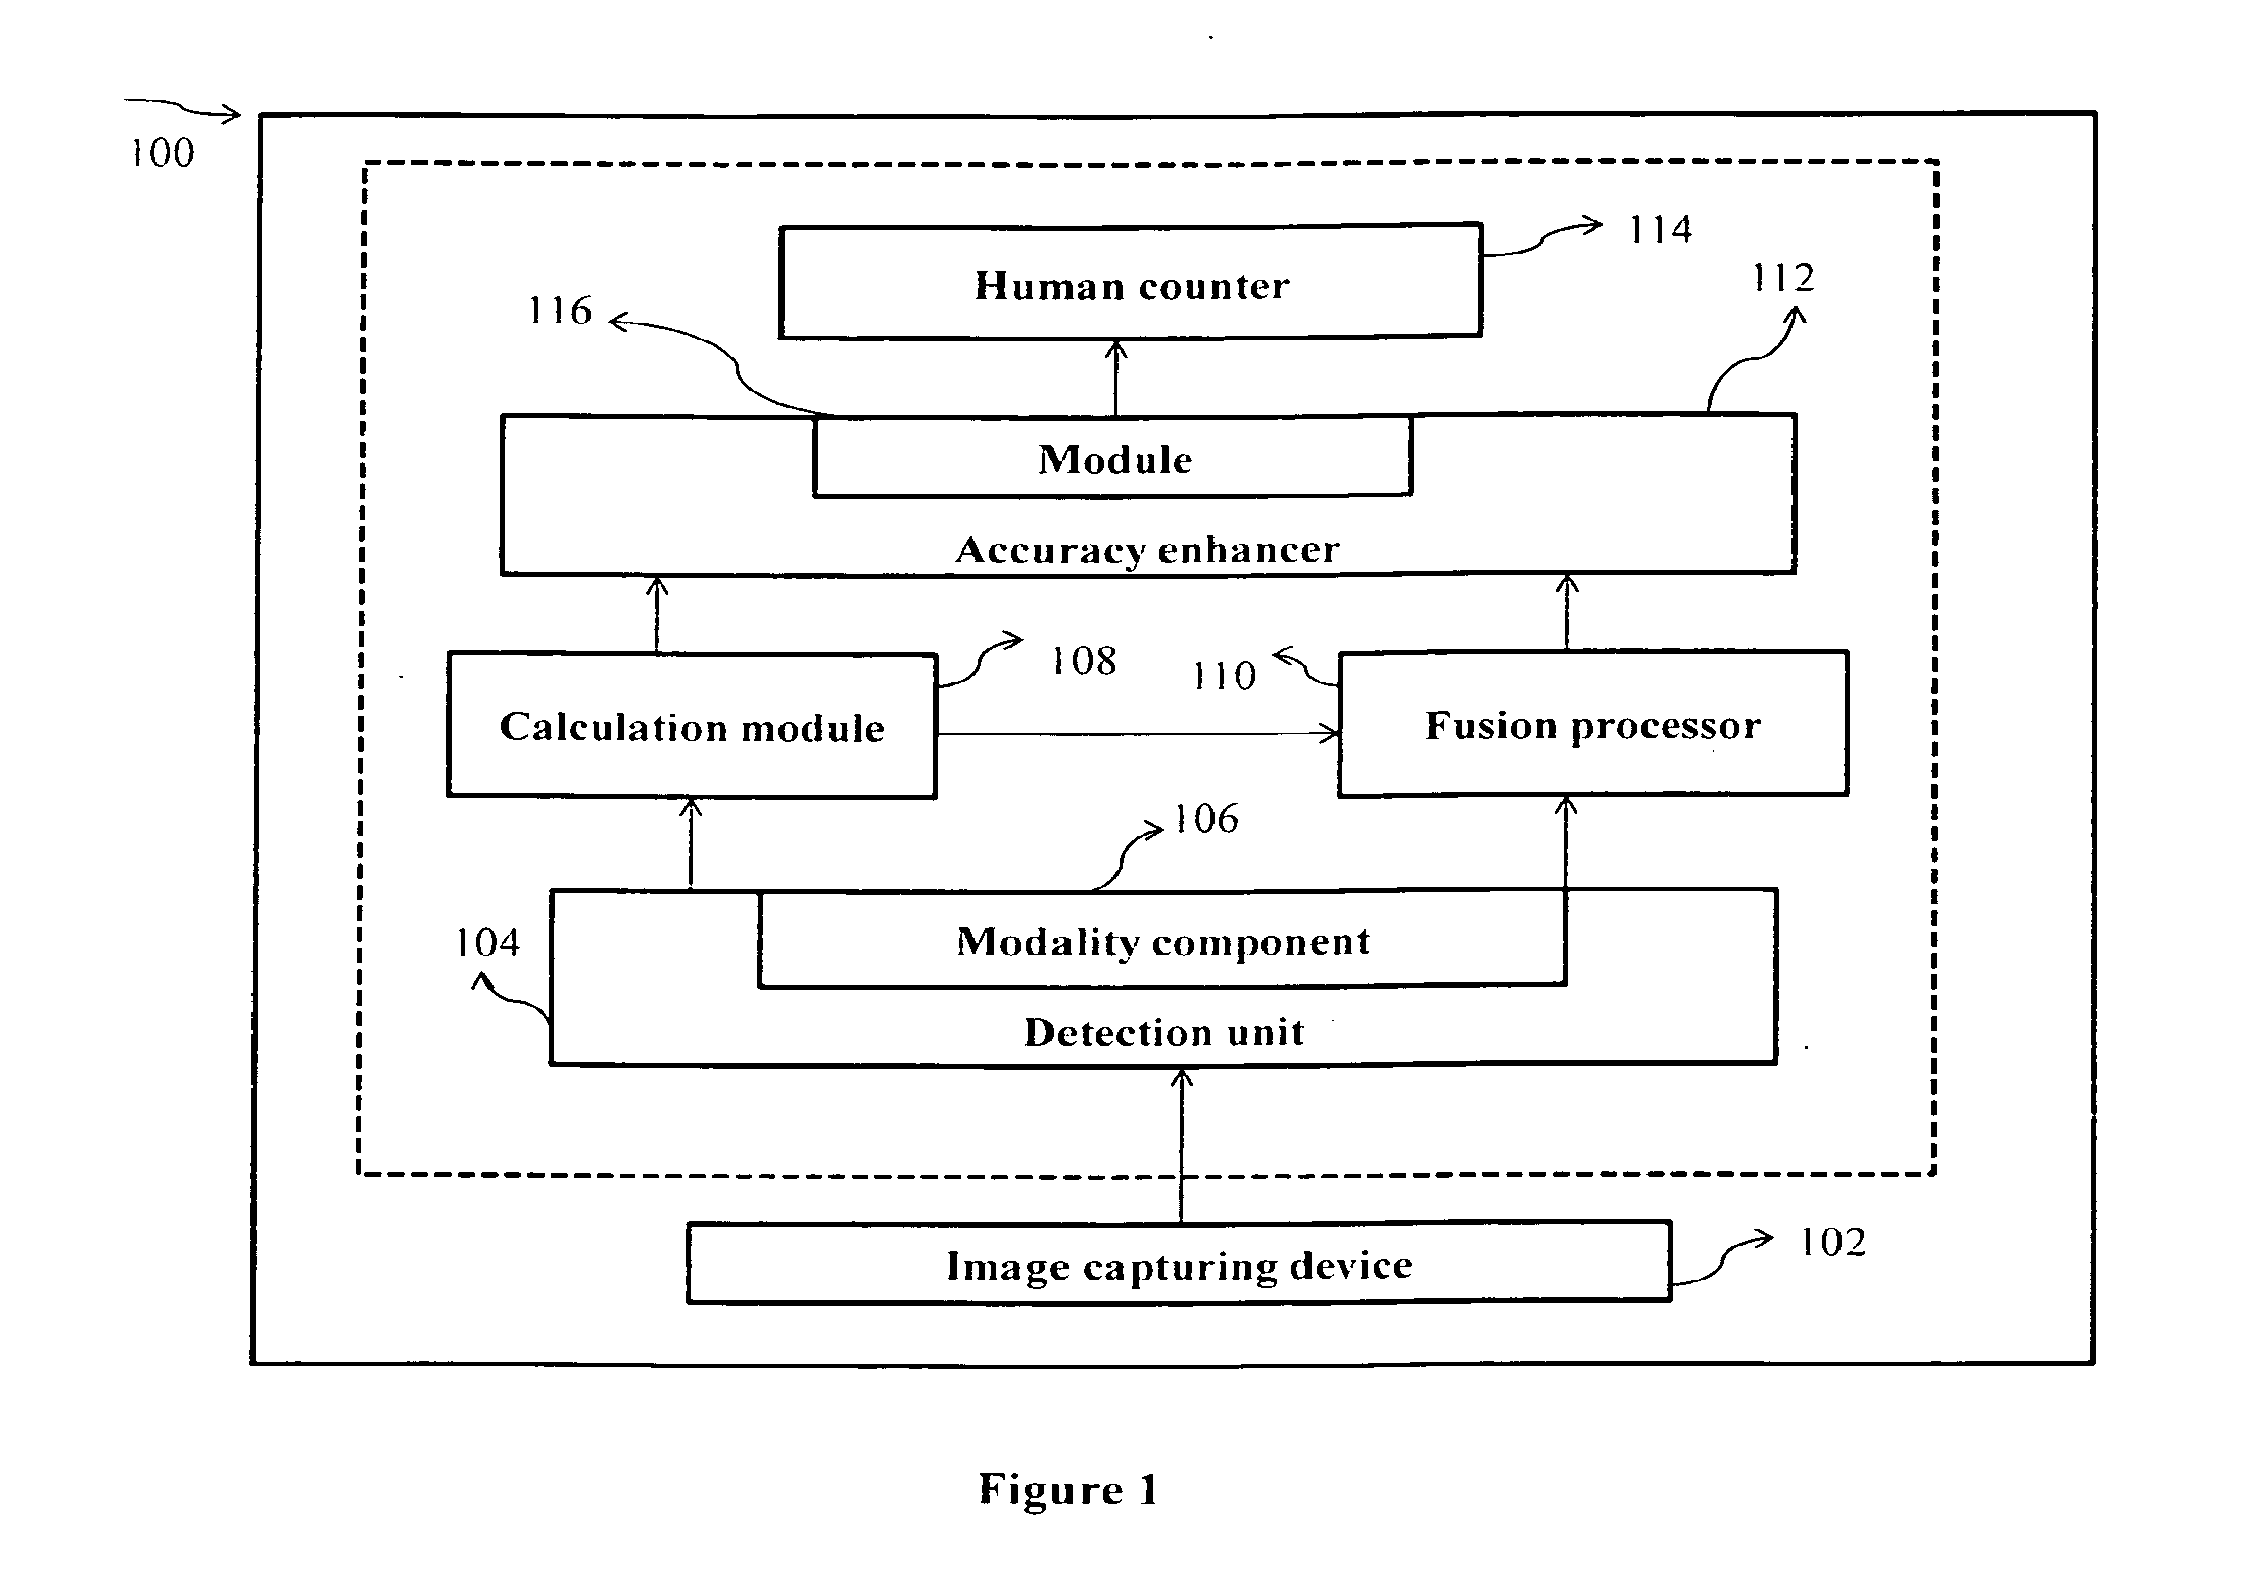 System and method for enhancing human counting by fusing results of human detection modalities